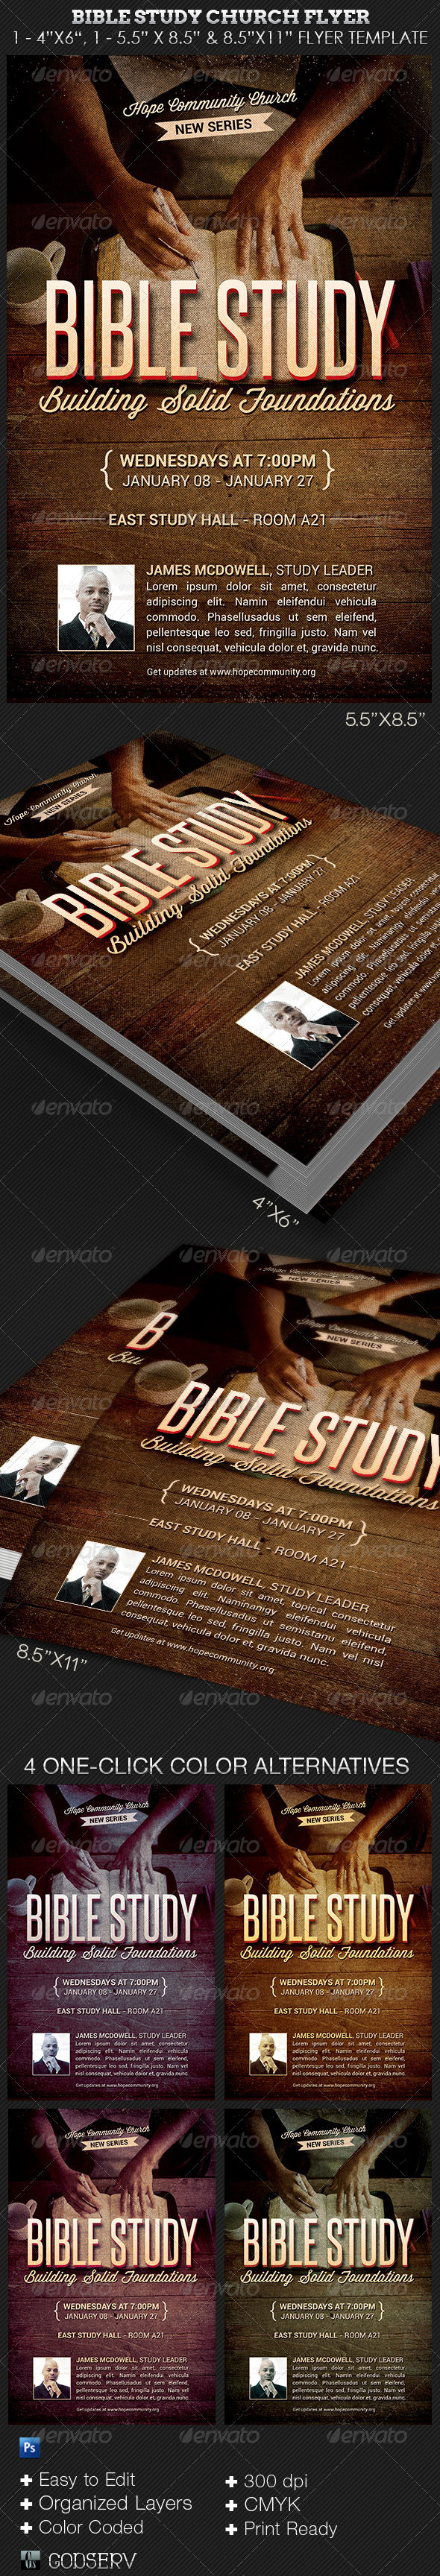 Bible study church flyer template preview